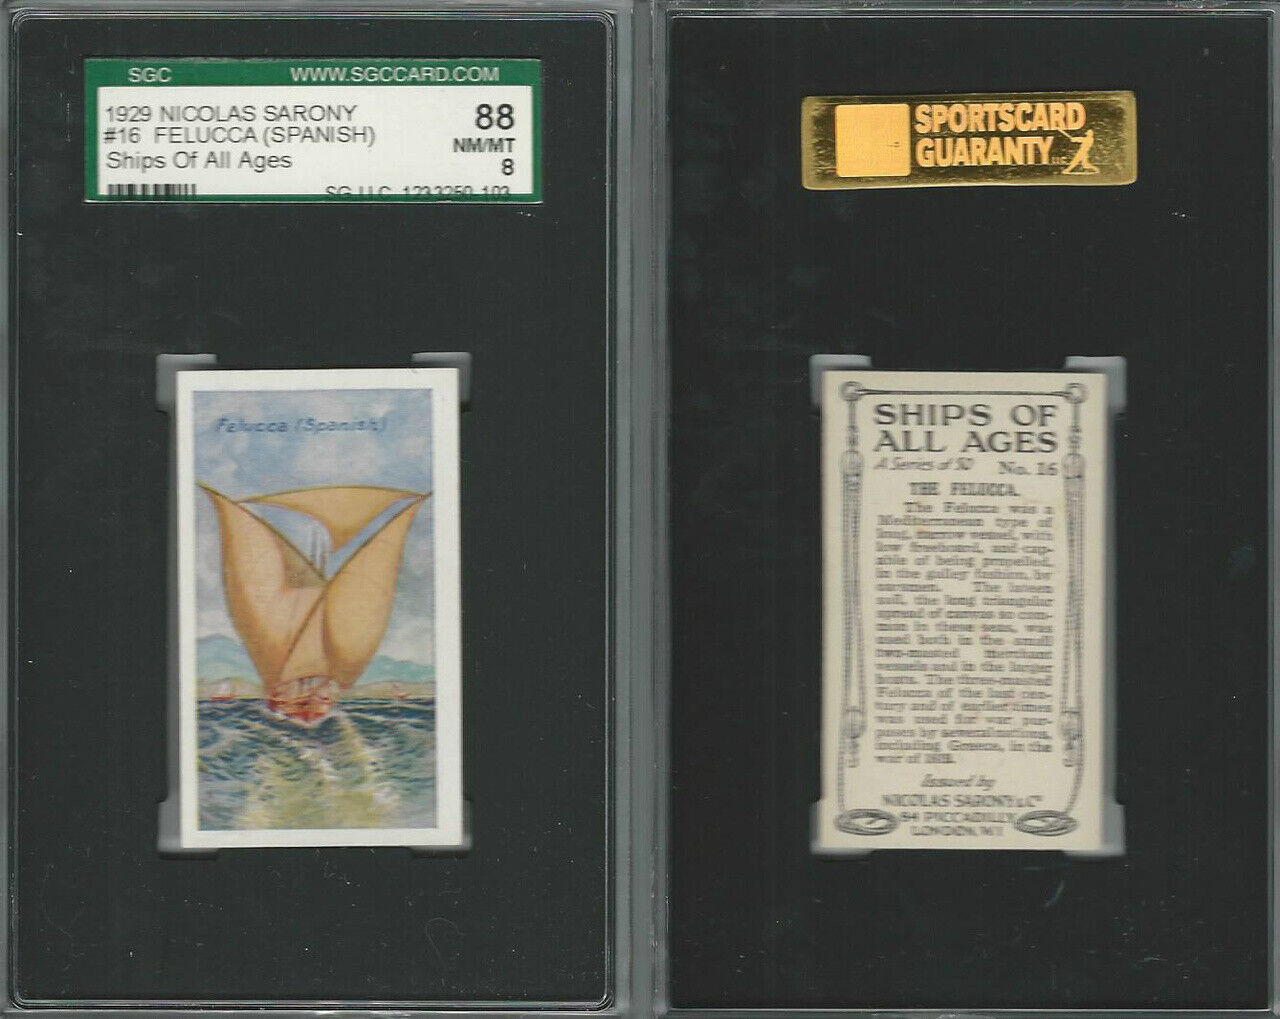 S26-16 Nicolas Sarony, Ships of all Ages, 1929, #16 Felucca Spanish, SGC 88 NMMT